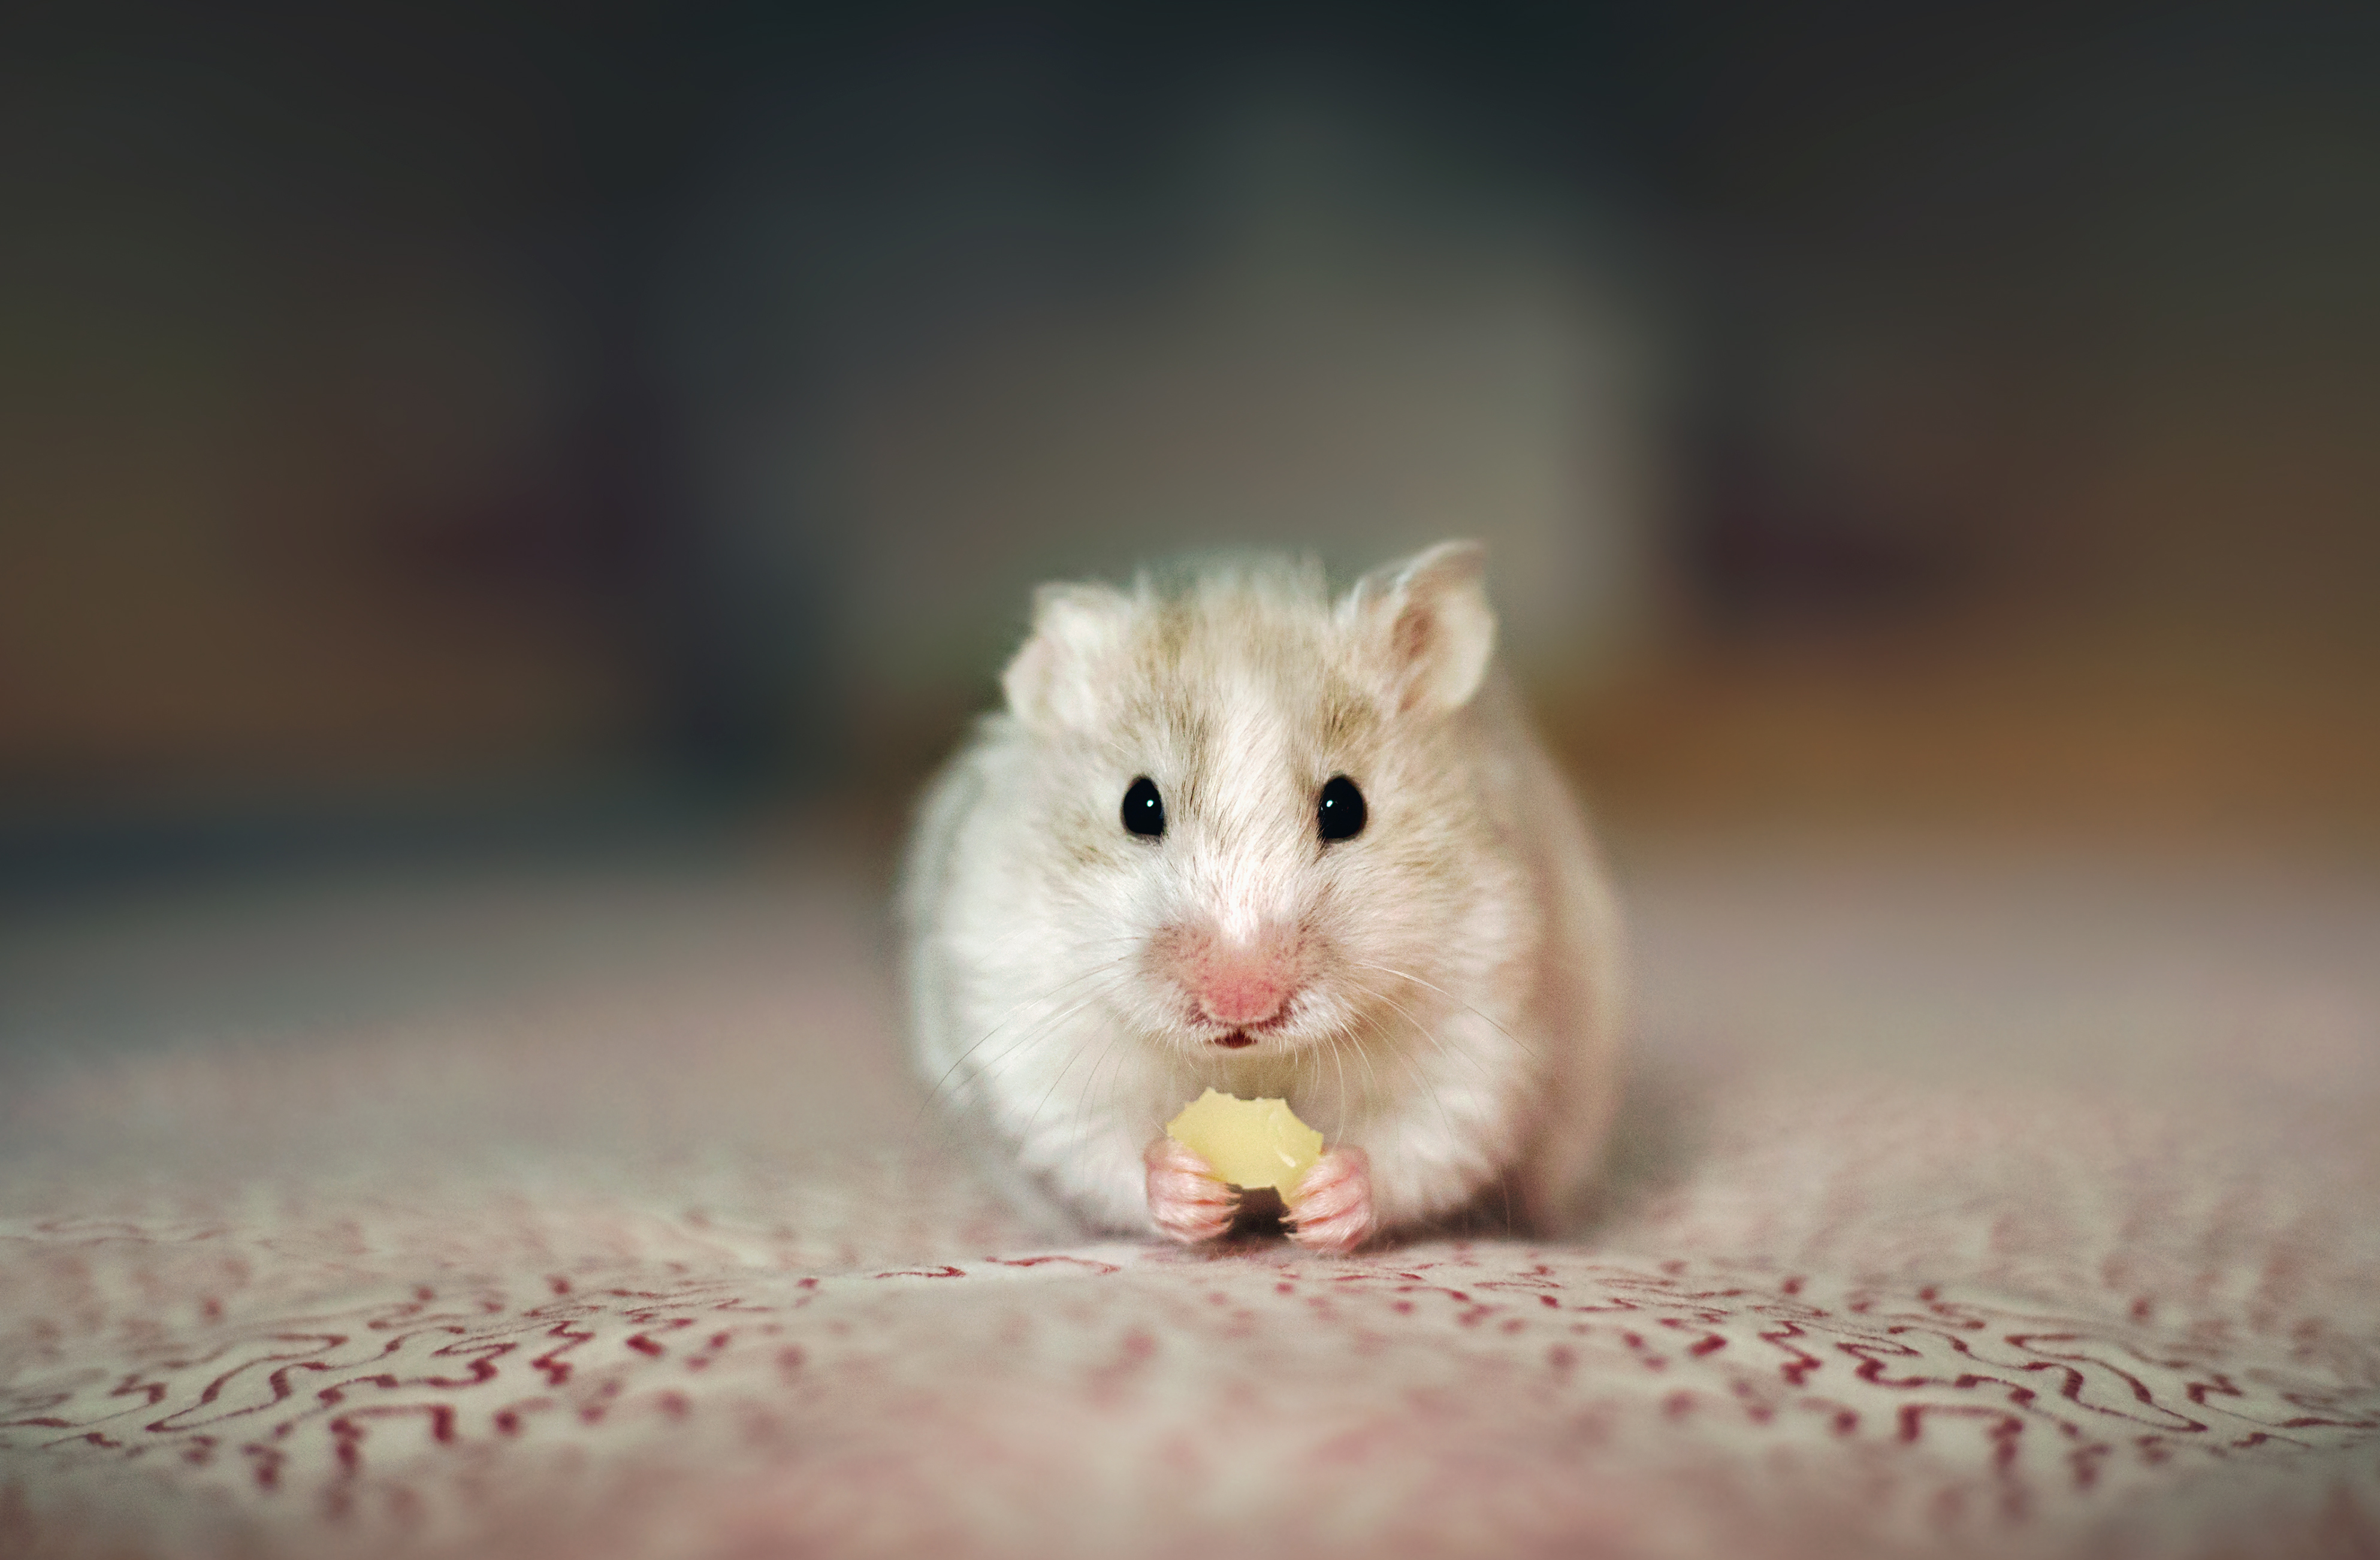 The pet I'll never forget: the emotional support hamster who